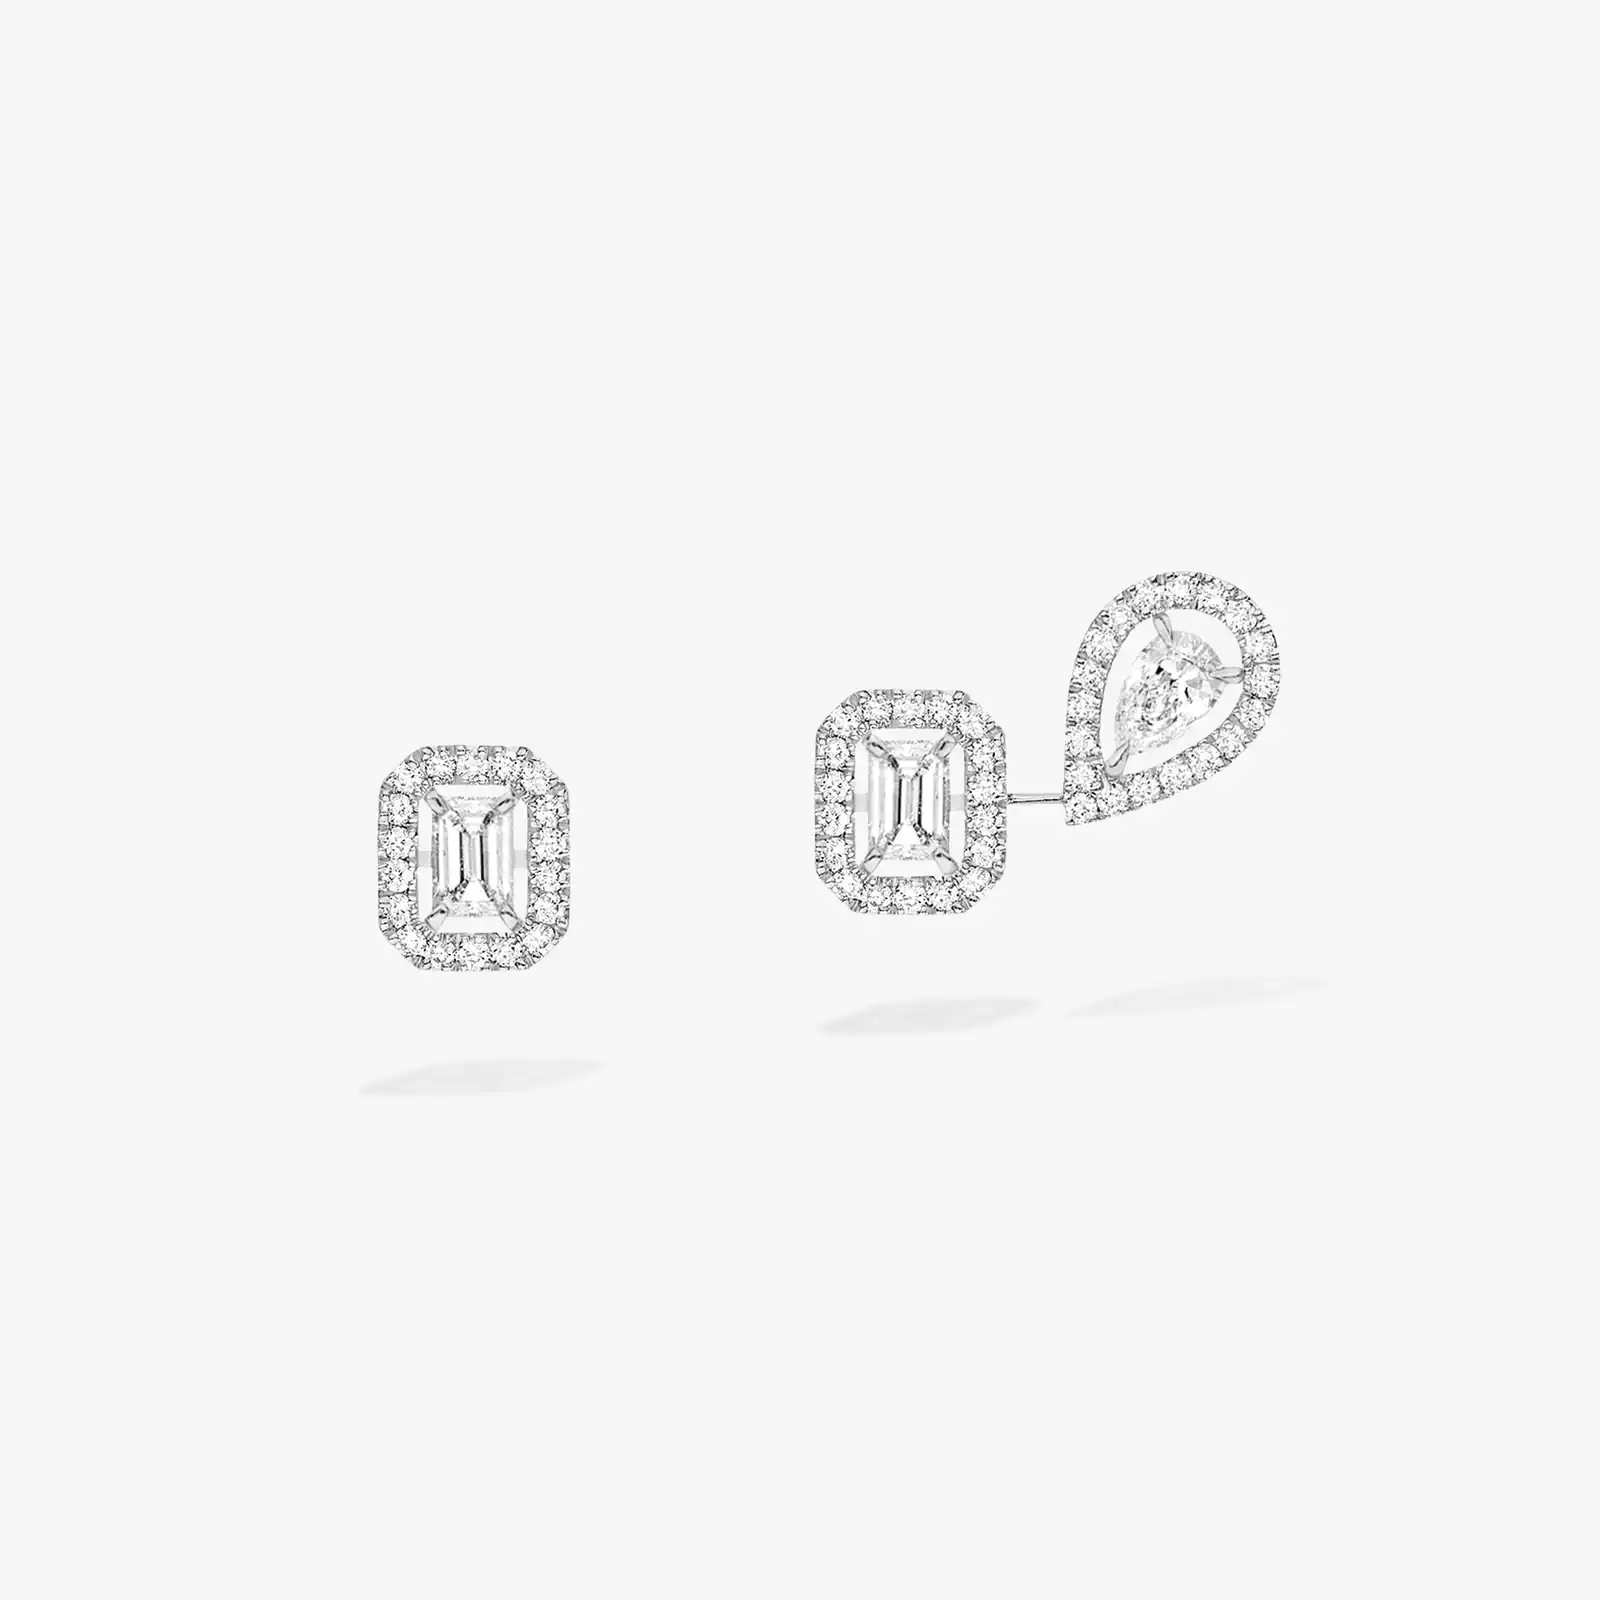 Earrings For Her White Gold Diamond My Twin 1+2 0.10ct x3 07004-WG